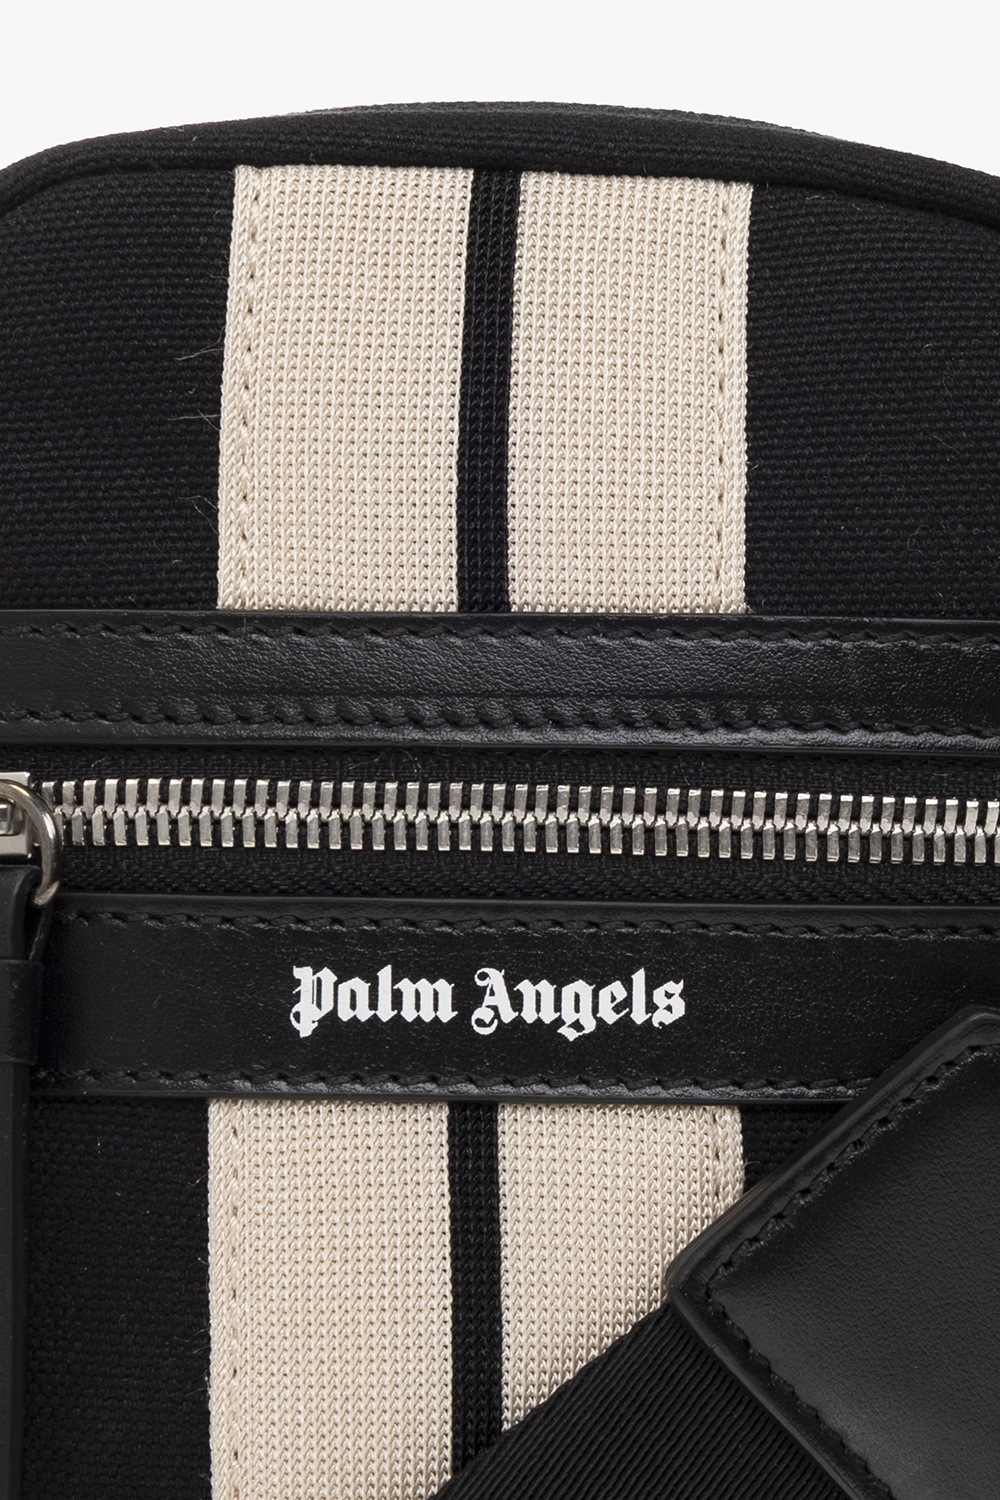 Palm Angels Explorafunk Empire backpack